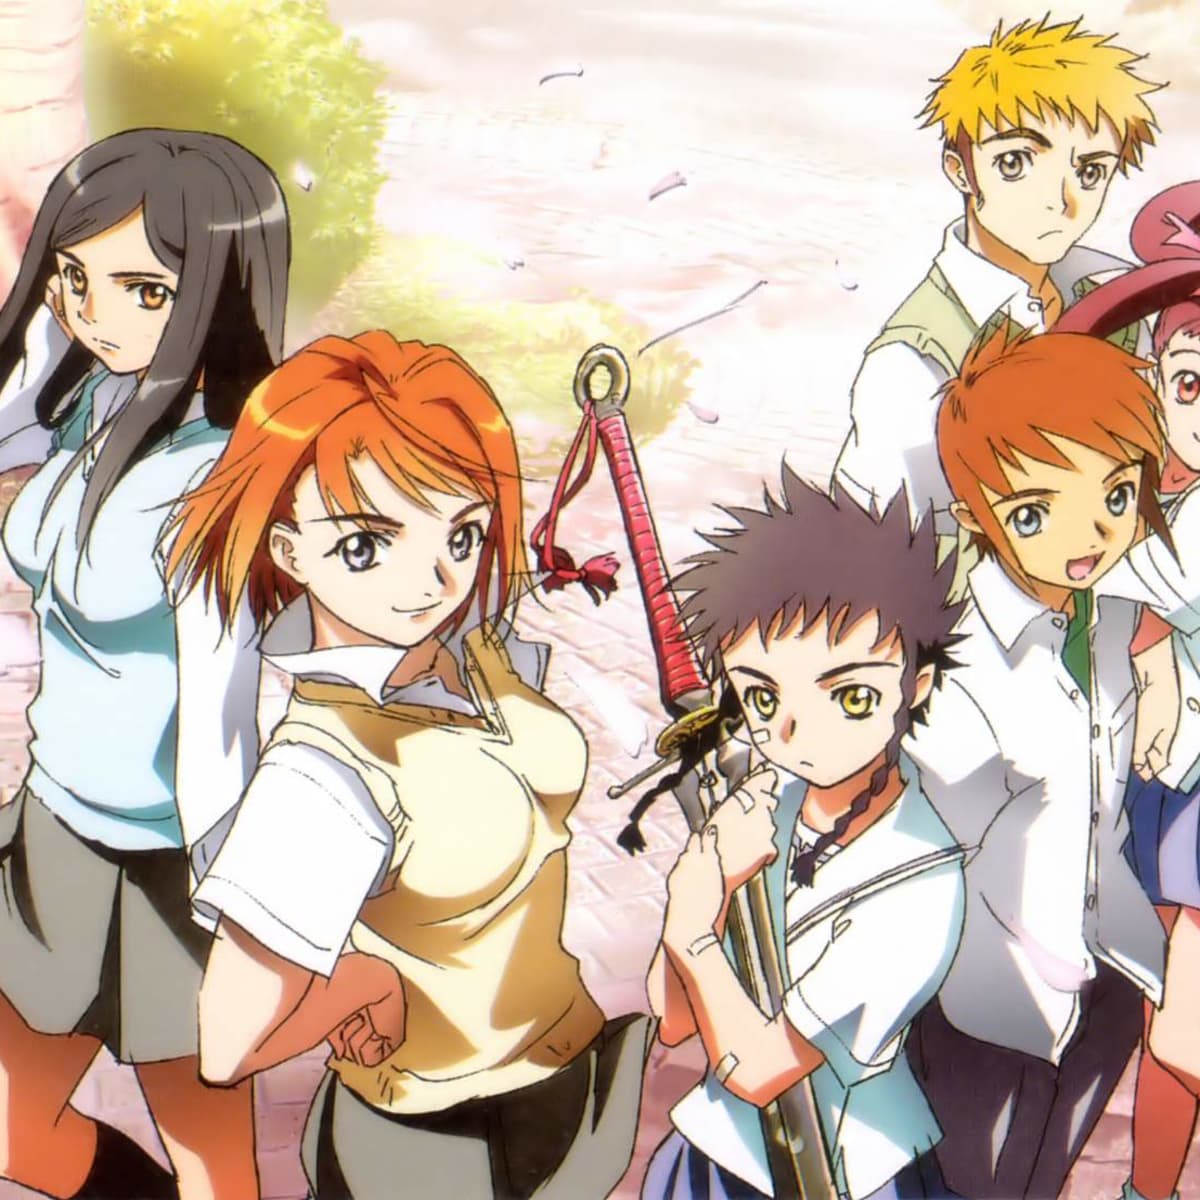 Why is Maid Sama considered the holy grail of romance anime?